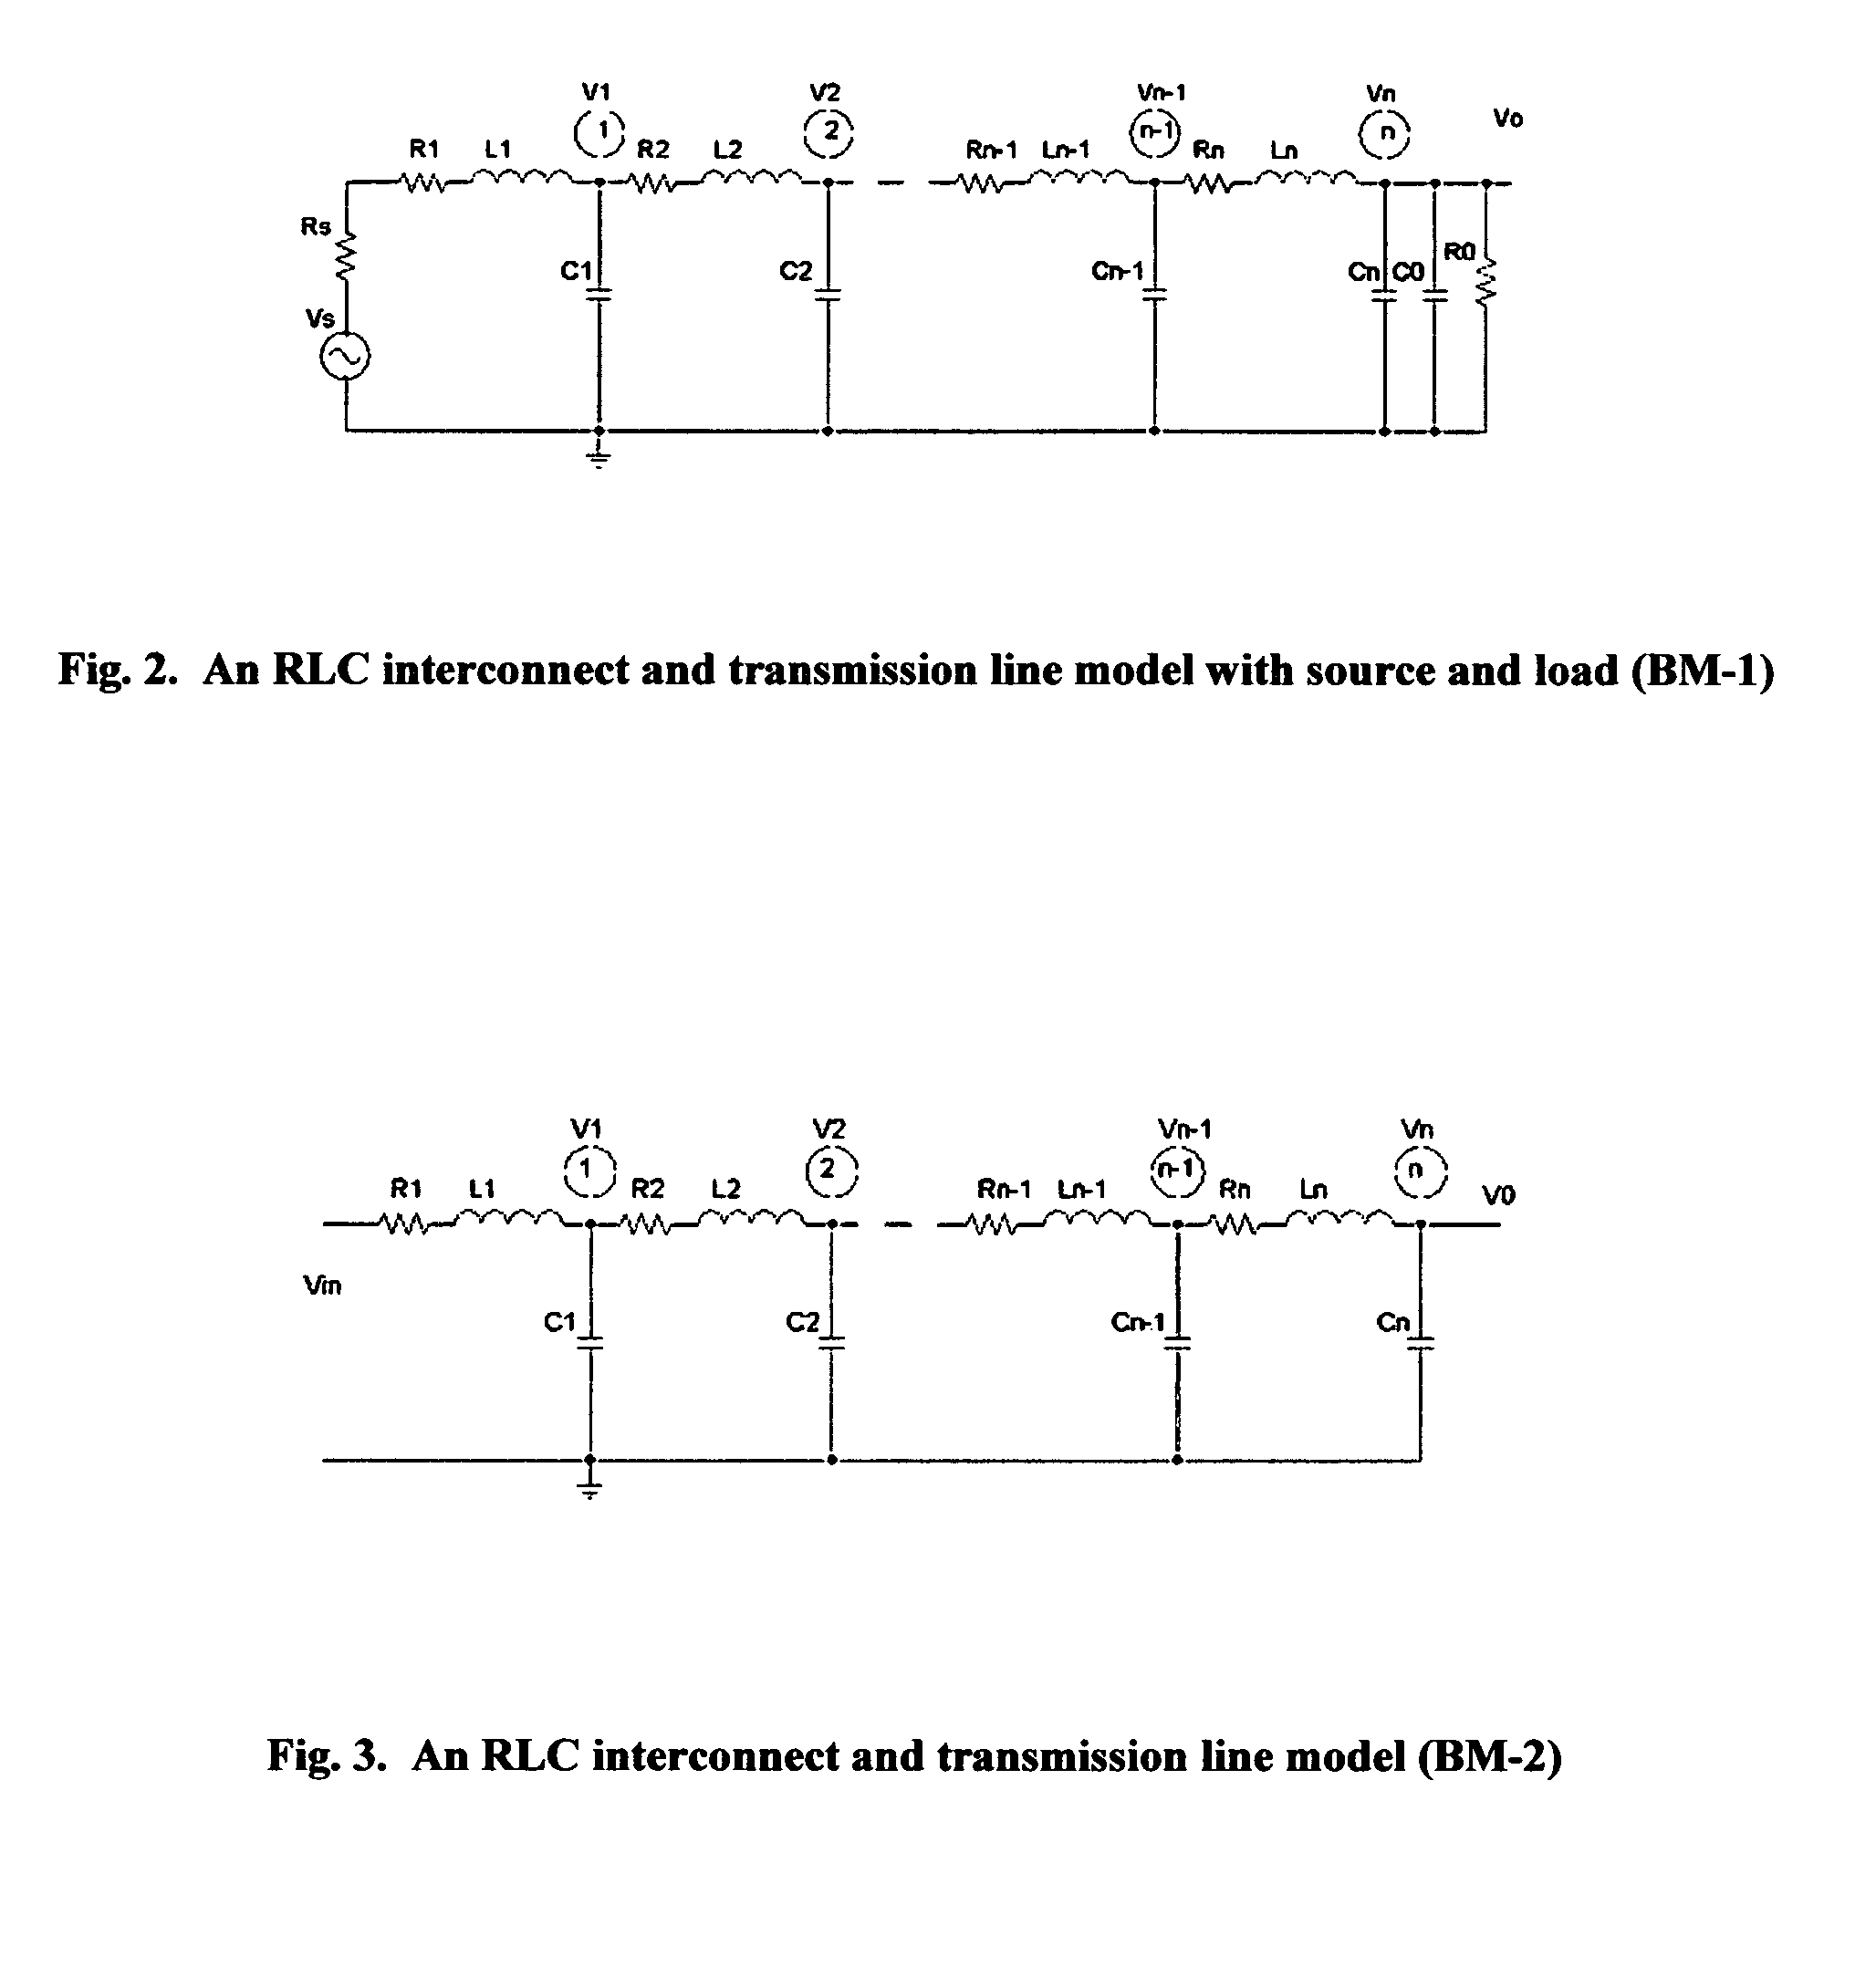 Methods to generate state space models by closed forms for general interconnect and transmission lines, trees and nets, and their model reduction and simulations